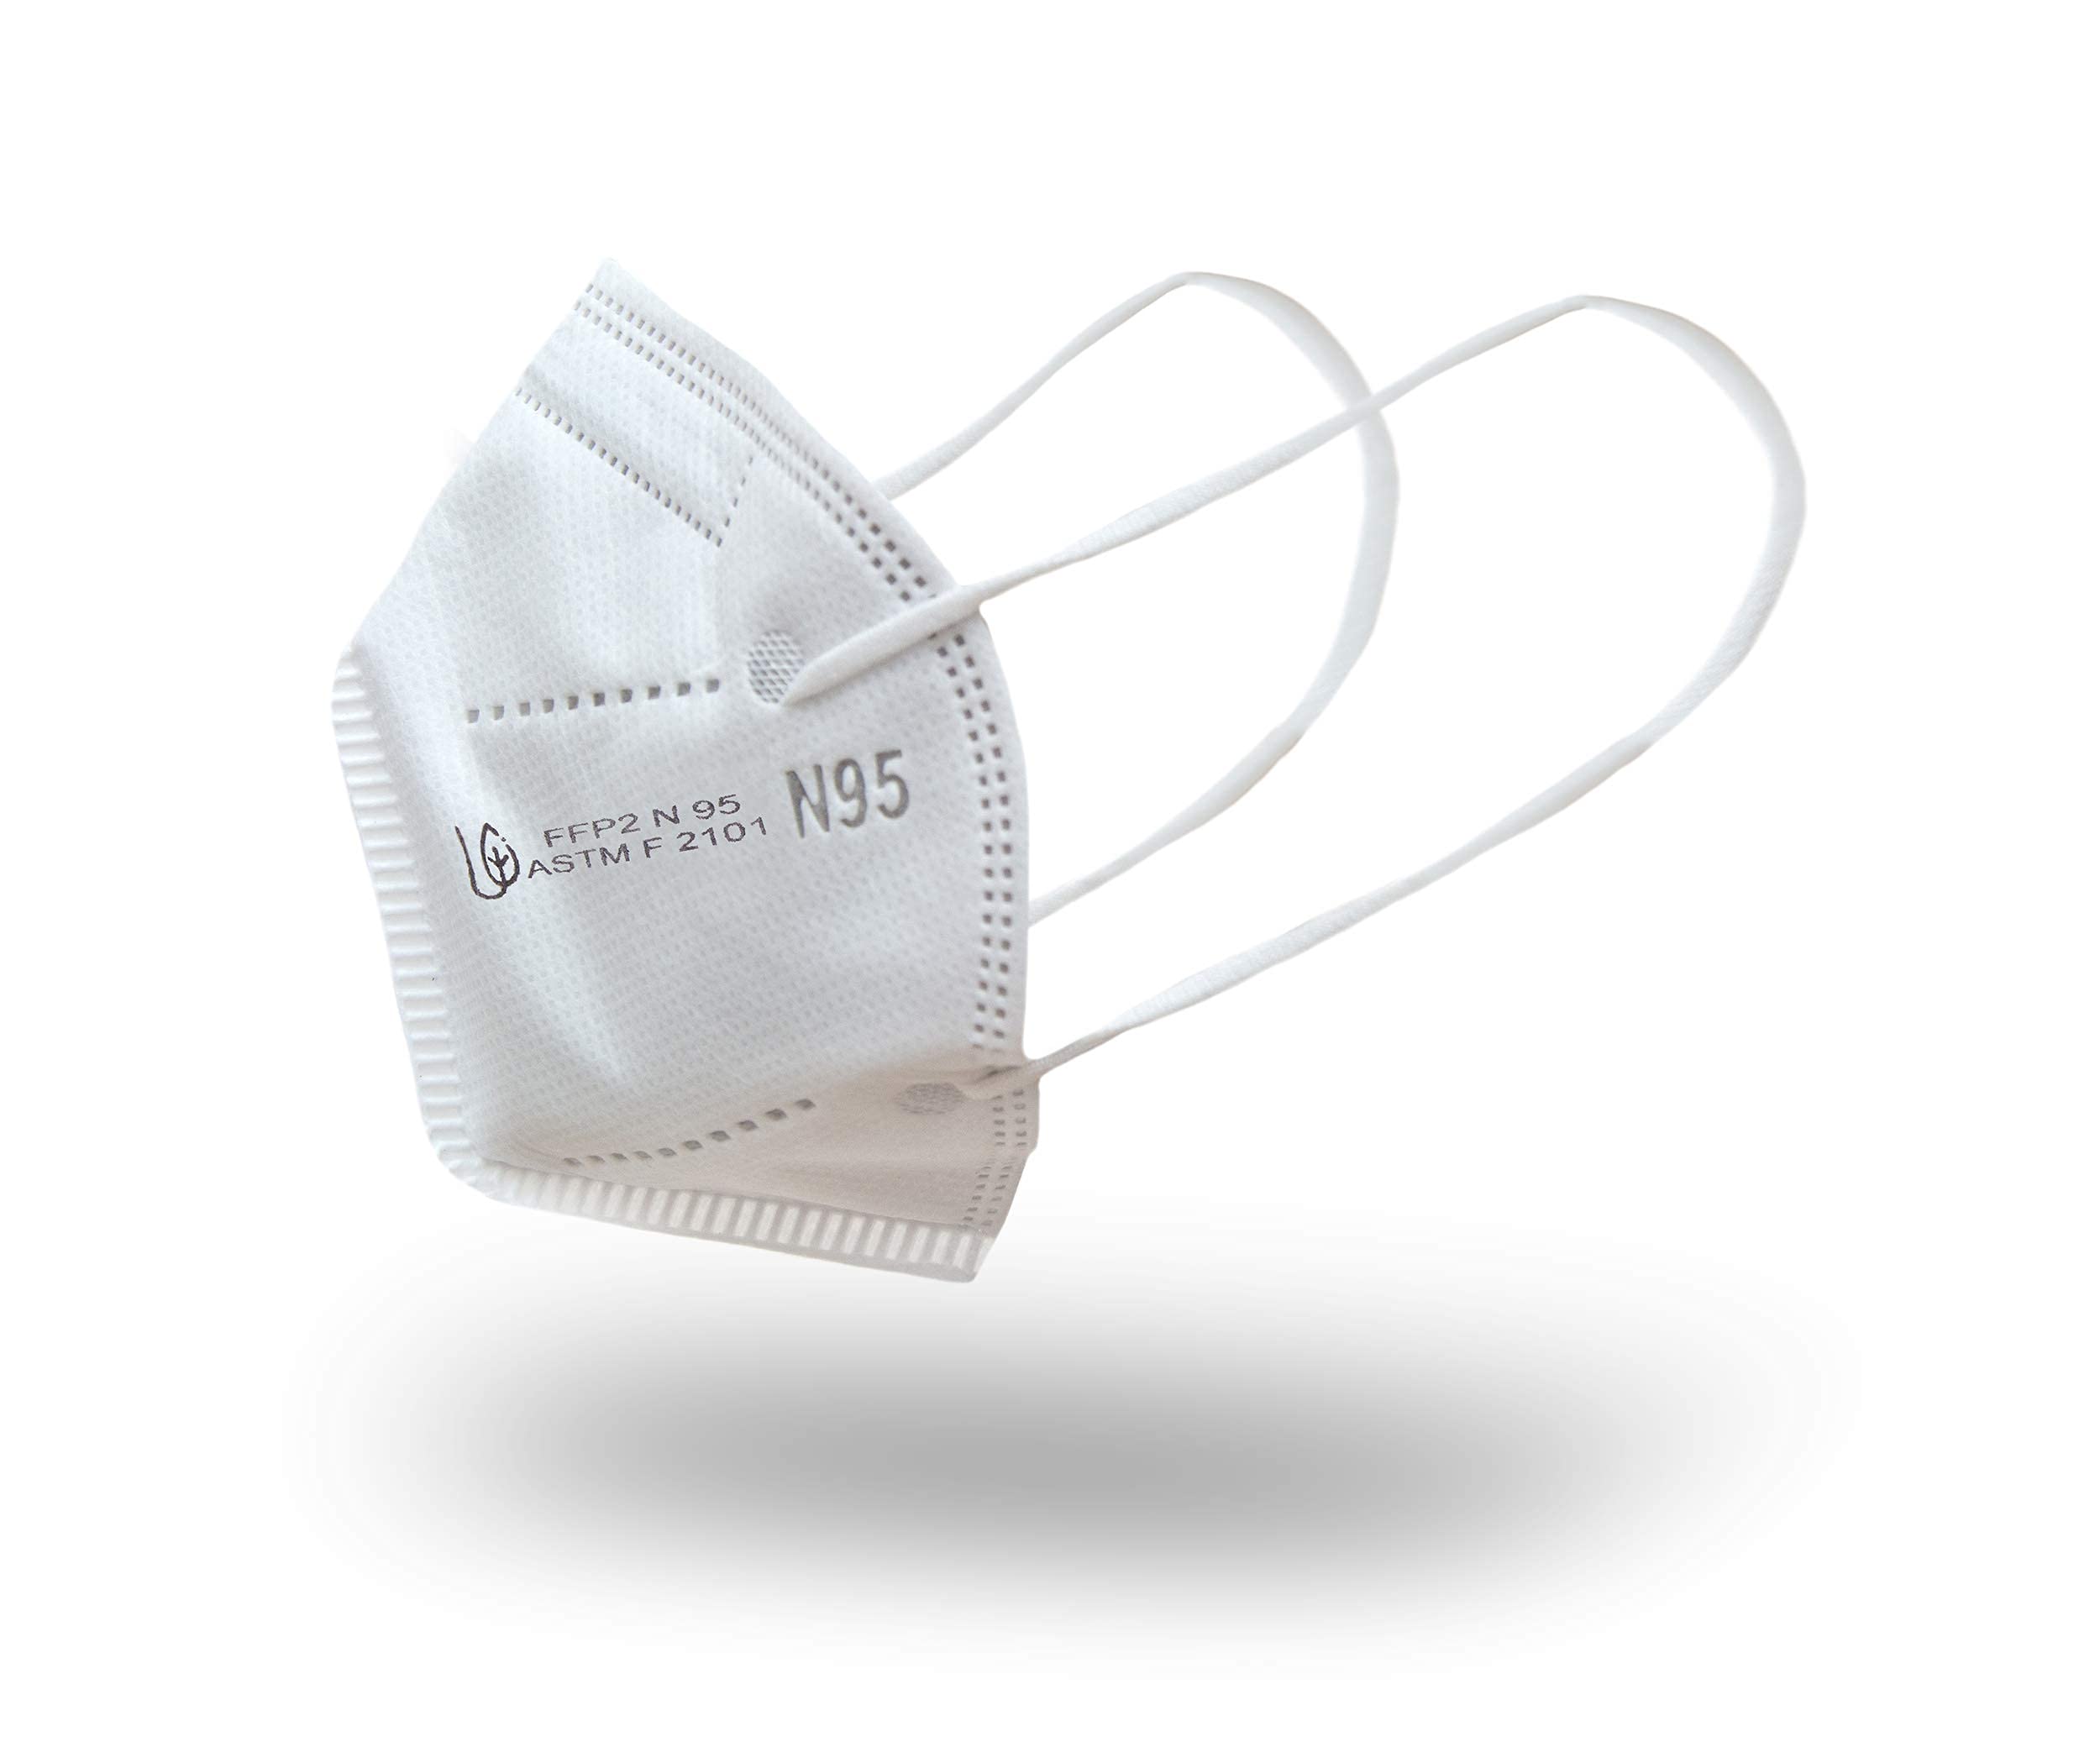 Mush N95 Face Mask : Soft, Reusable 6 layered face mask (Pack of 10). CE, ISO, FDA Certified and NABL, SITRA lab tested